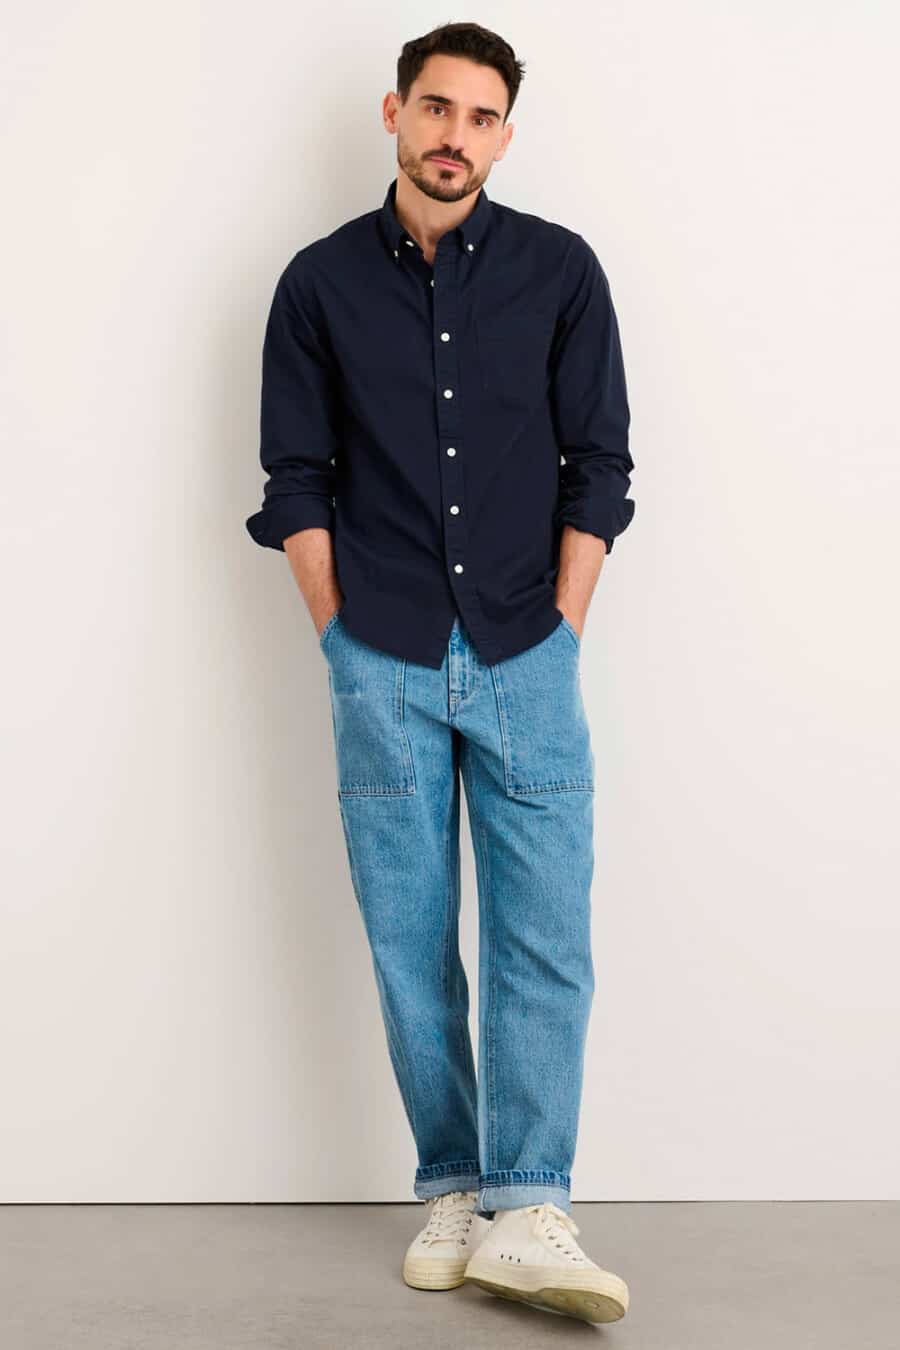 Men's light wash carpenter jeans, navy Oxford button-down shirt and white mid-top canvas sneakers outfit